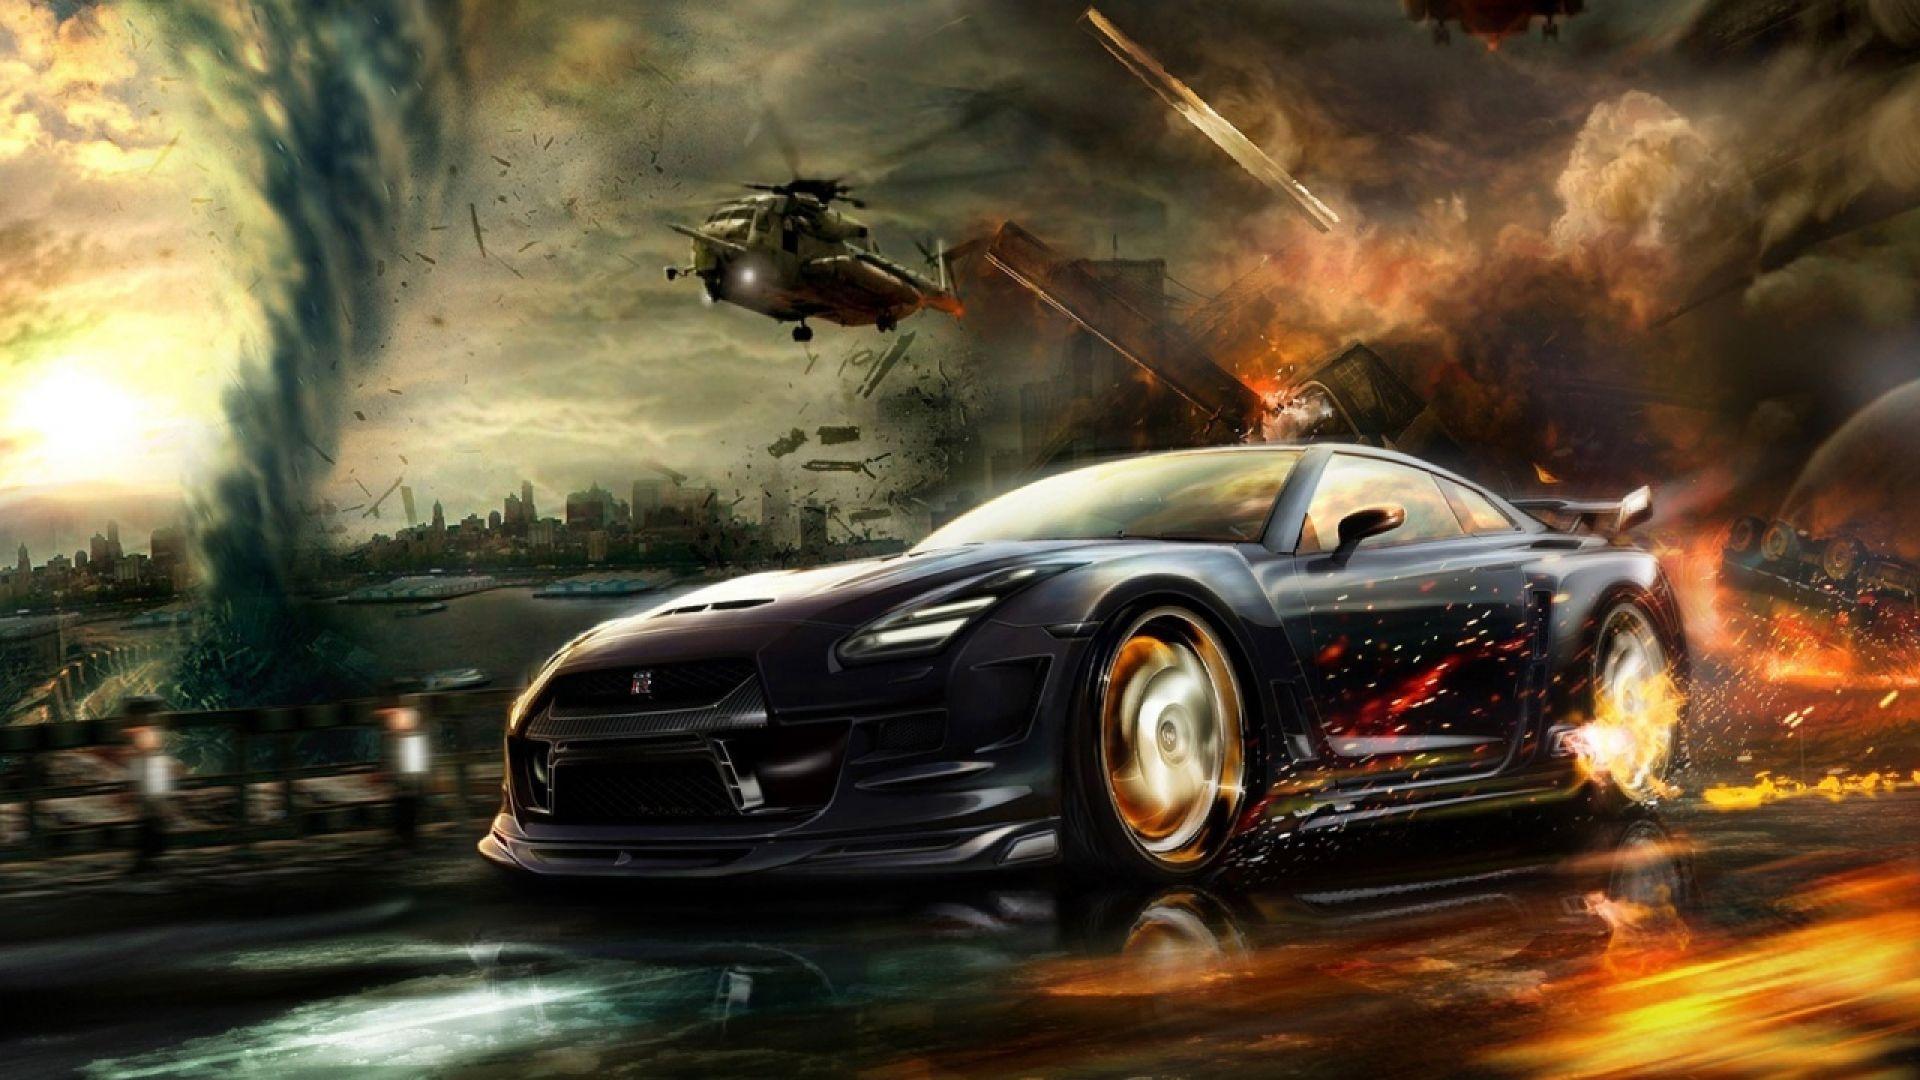 Fantasy Racing Car With Fire on Wheel. HD Other Cars Wallpaper